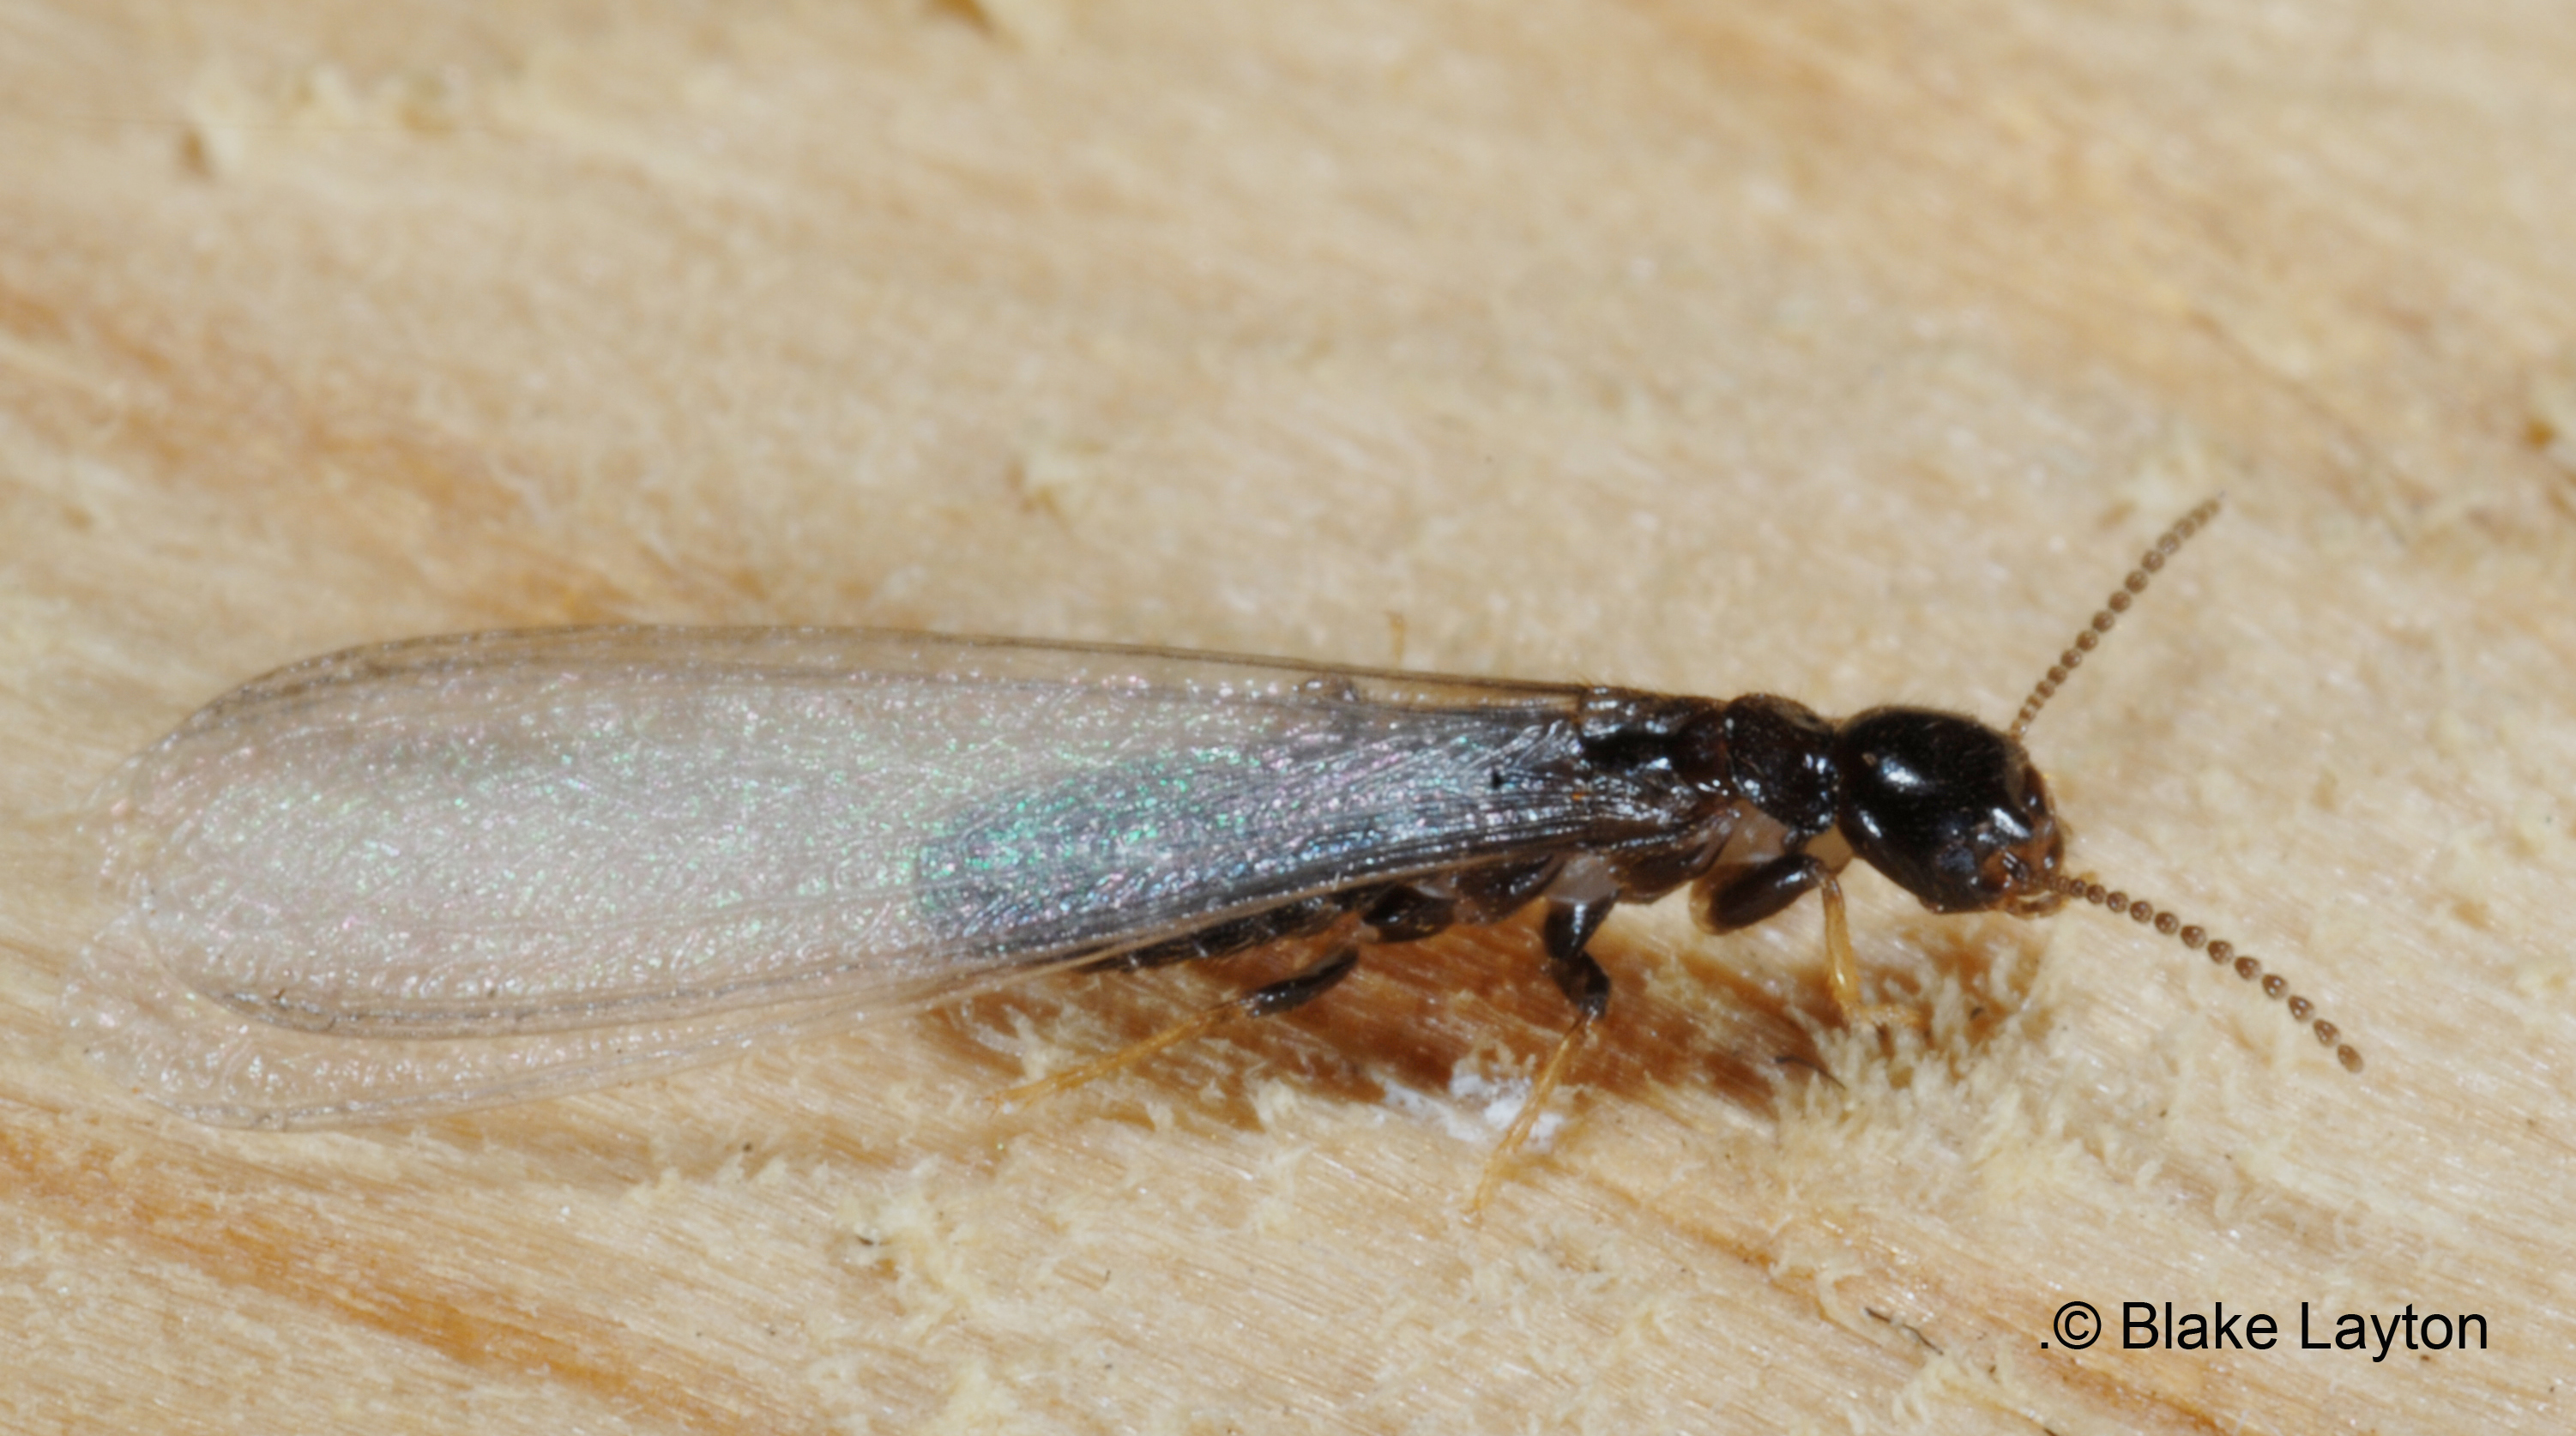 This is an Eastern subterranean termite swarmer. Note the long wings, with both pairs of equal length, and the straight, beadlike antennae.